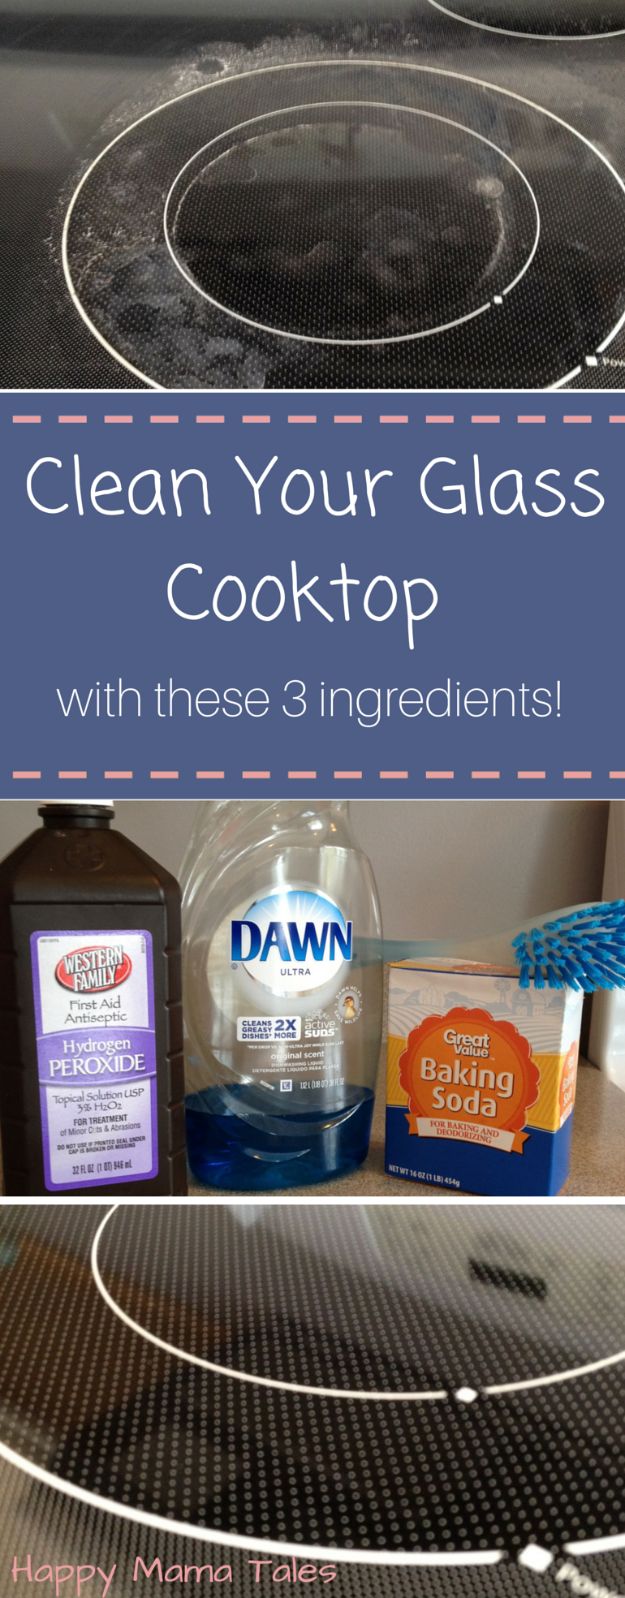 Cleaning Tips and Tricks - Clean a Glass Cook-top - Best Cleaning Hacks, Recipes and Tutorials - Daily Ways to Clean For Kitchen, For Couches, Bathroom, Bedroom, Laundry, Floors, Furniture, Windows, Cleaners and More for Cleaning Your Home- Quick Ideas for Lazy People - Cool Cleaning Hack Tutorial